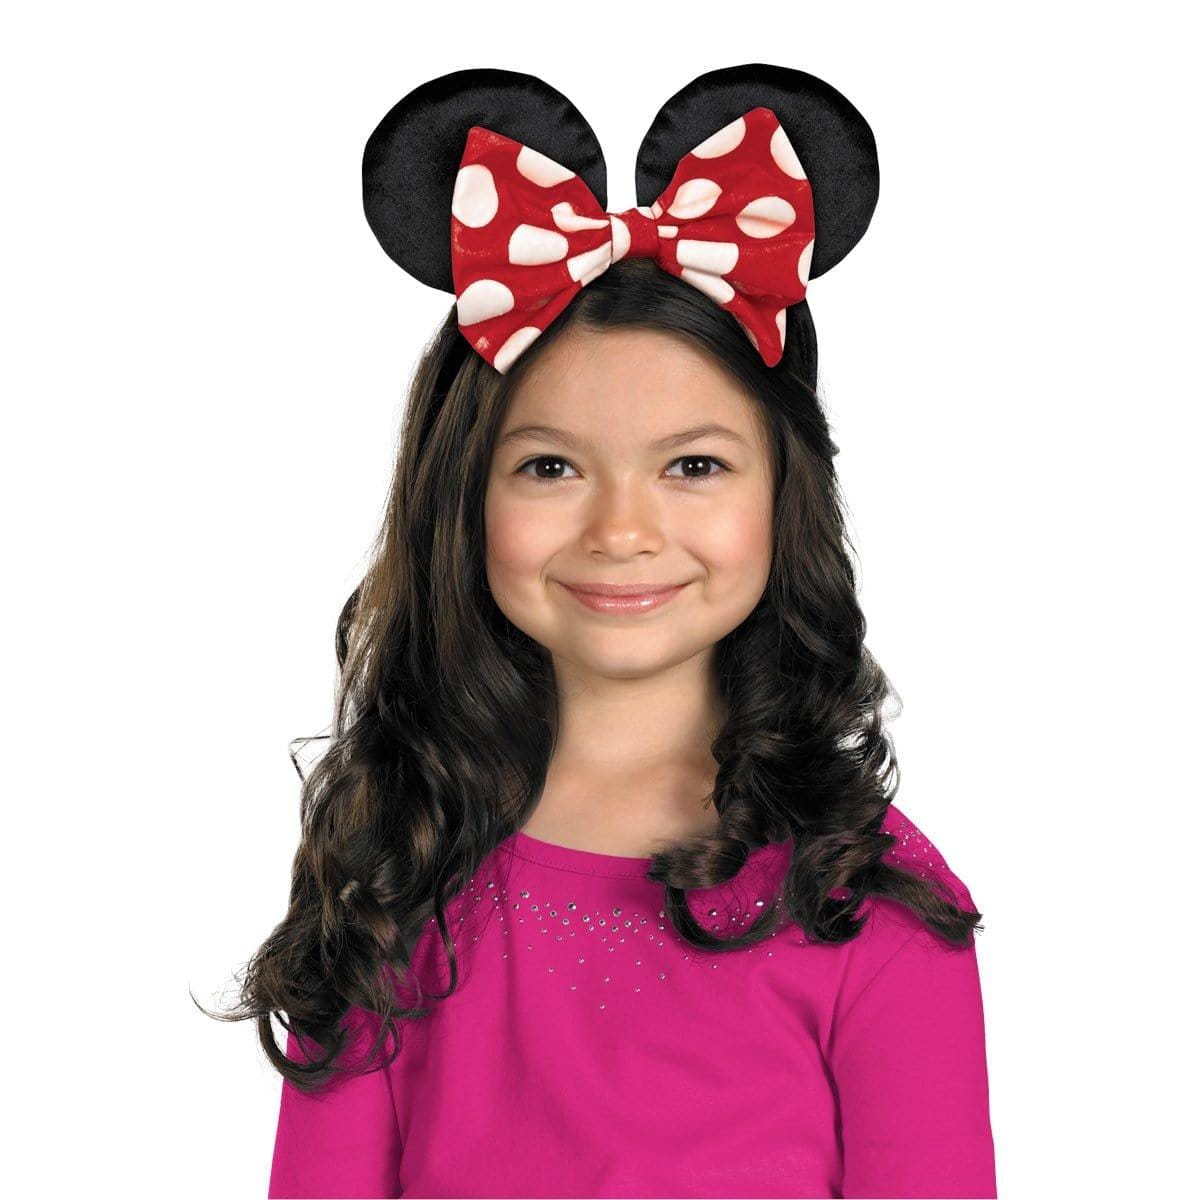 Buy Costume Accessories Minnie Mouse ears headband for kids, Disney sold at Party Expert